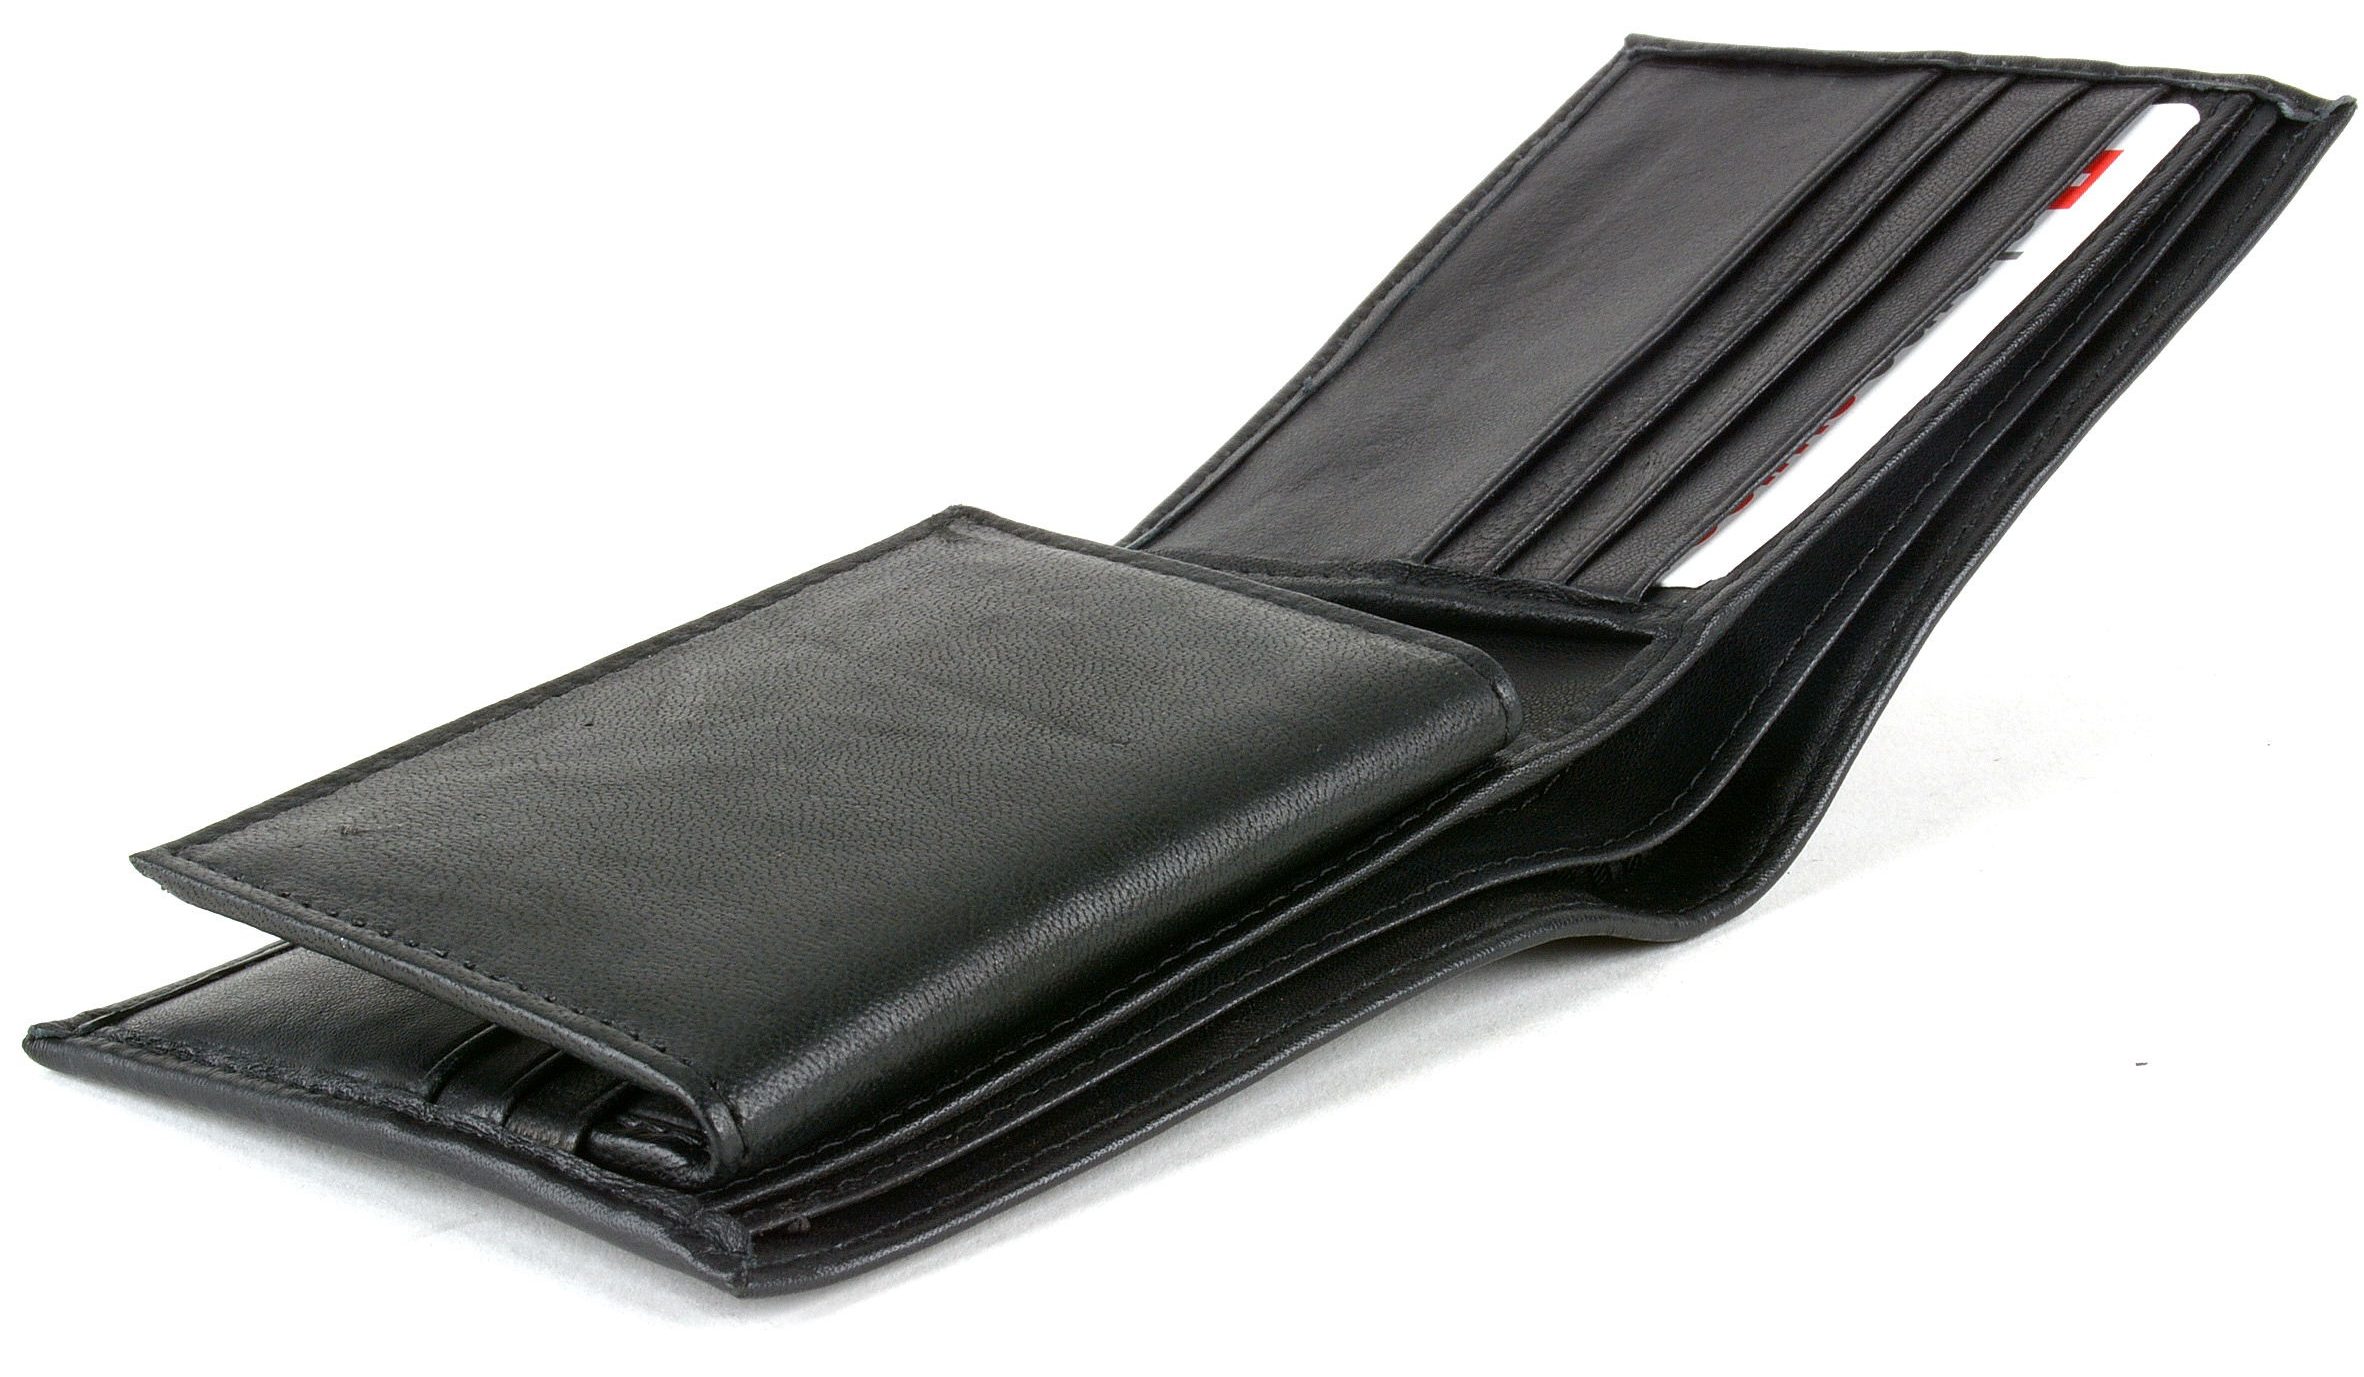 Alpine Swiss Men’s Wallets and Money Clips Only $7.99 + FREE Shipping!